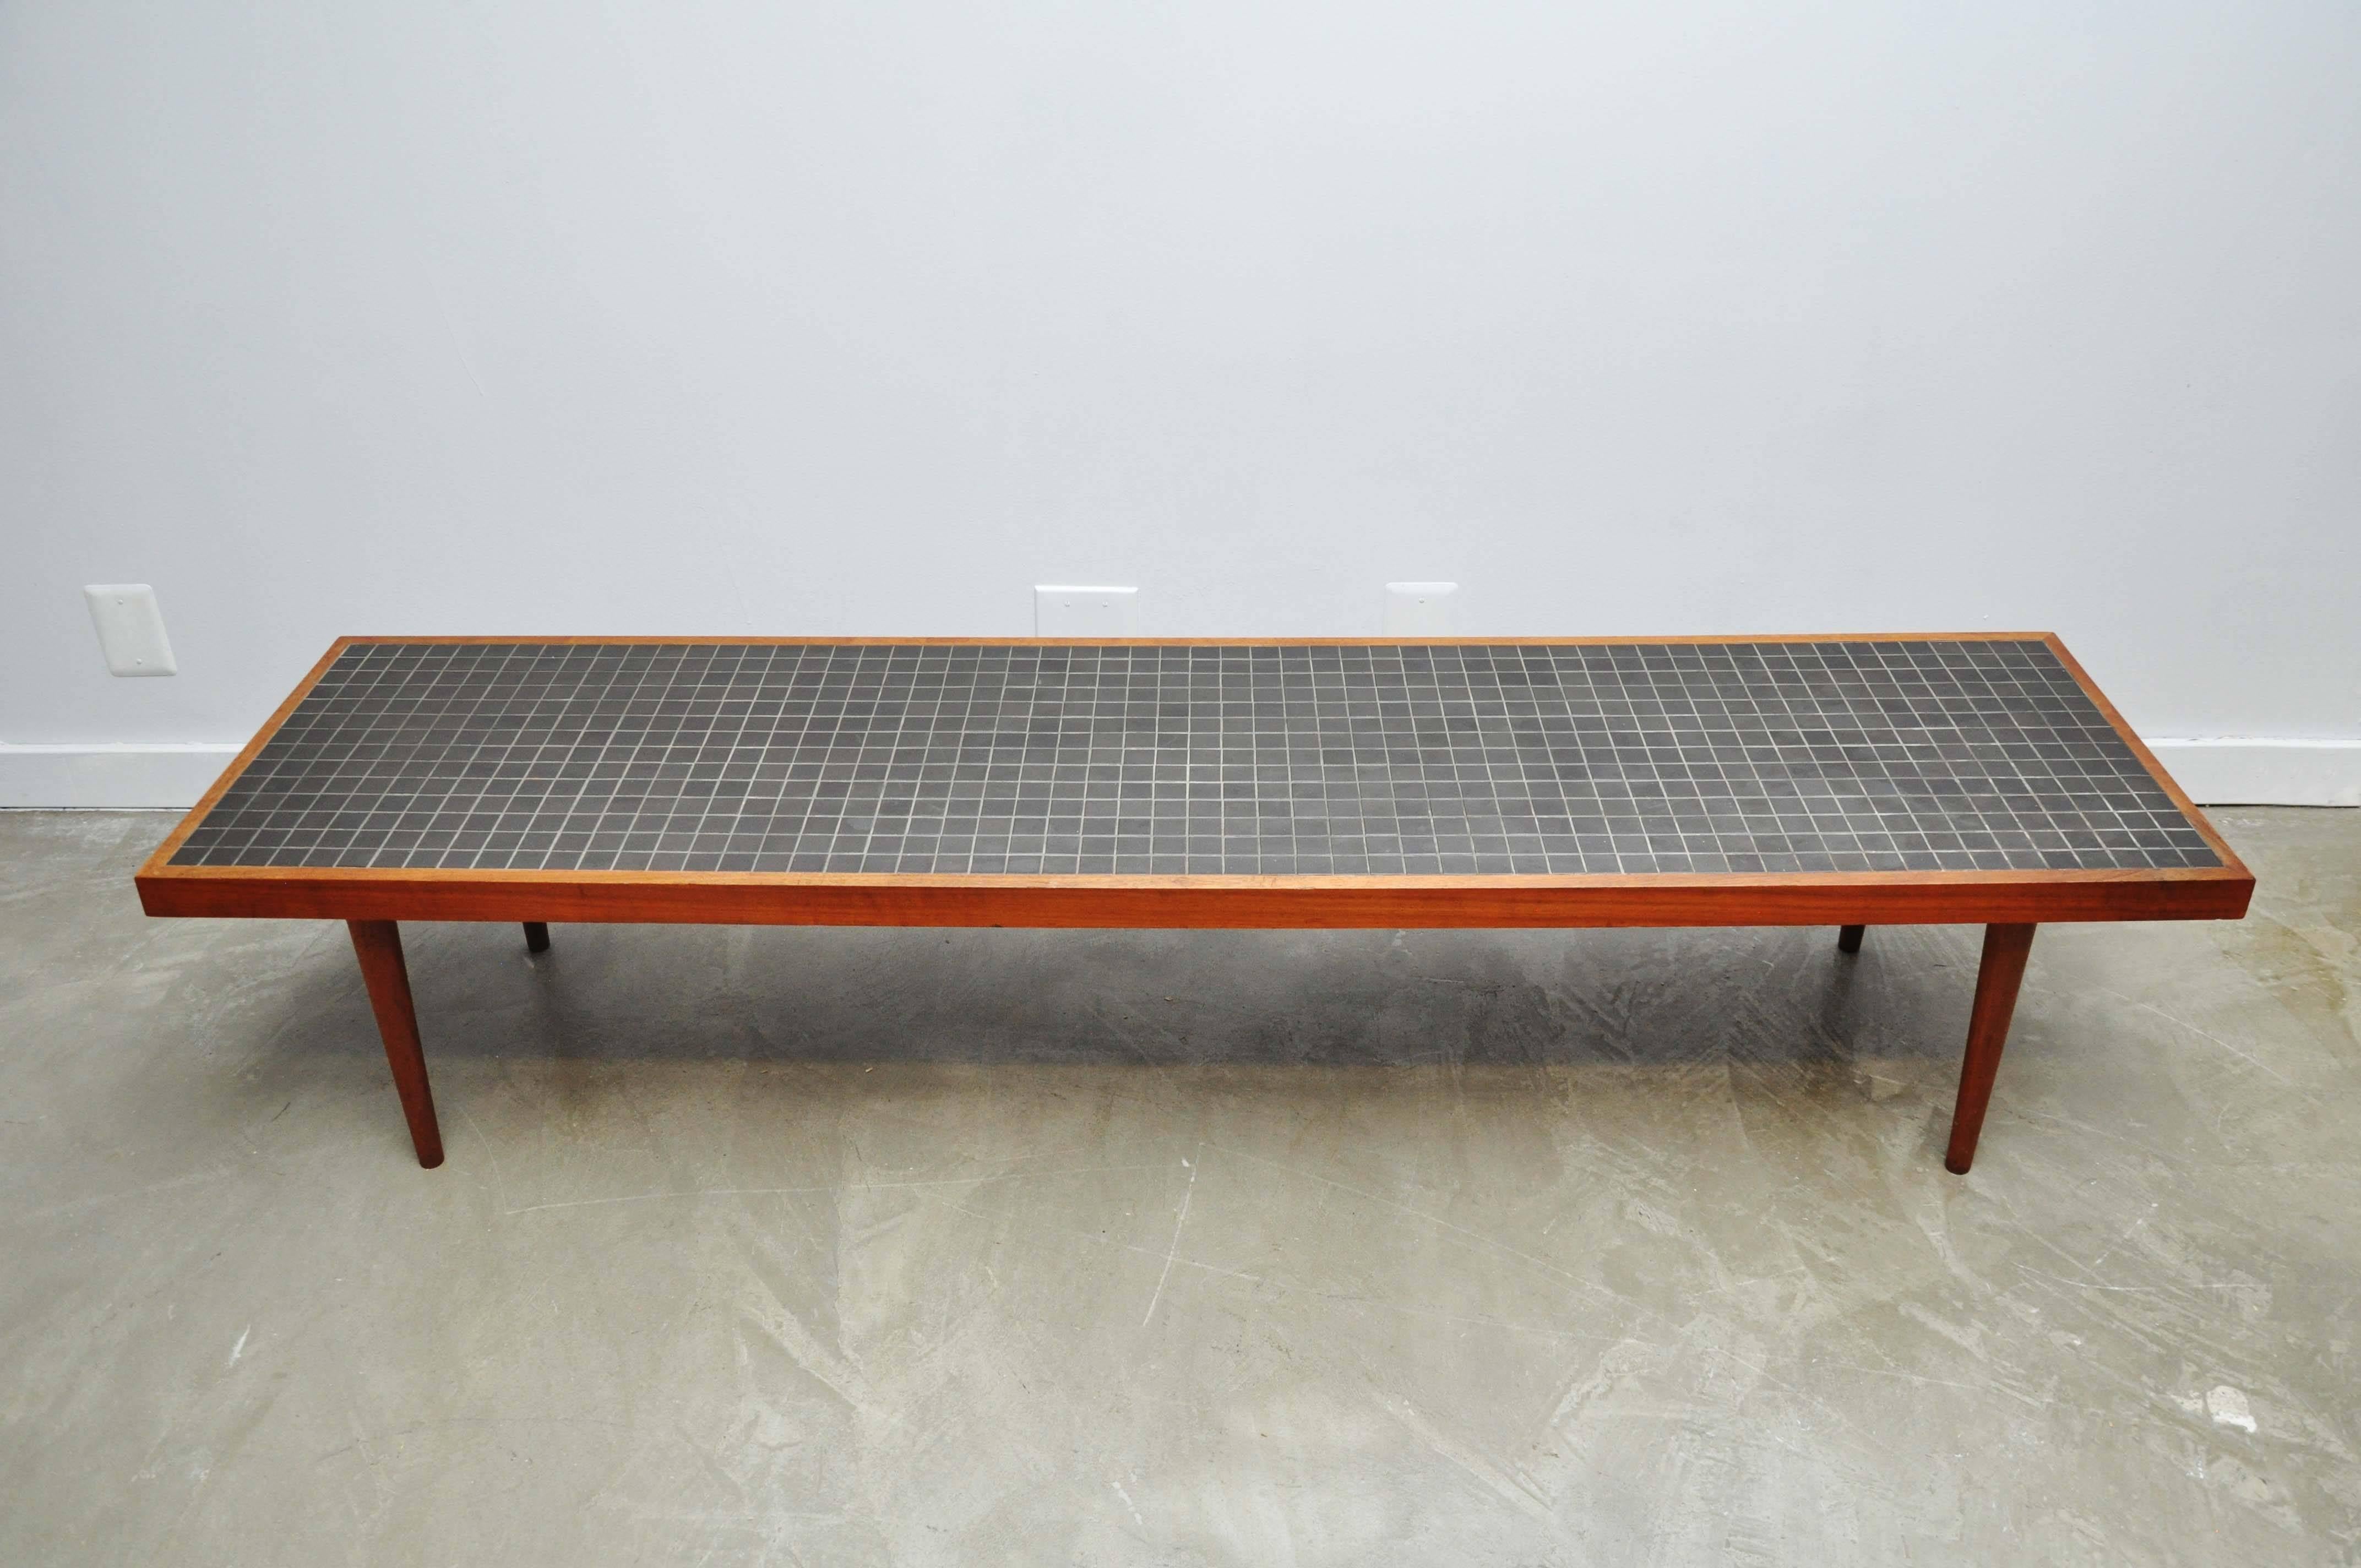 Rare walnut coffee table with ceramic tiles by Gordon and Jane Martz for Marshall Studios, circa 1960.
 